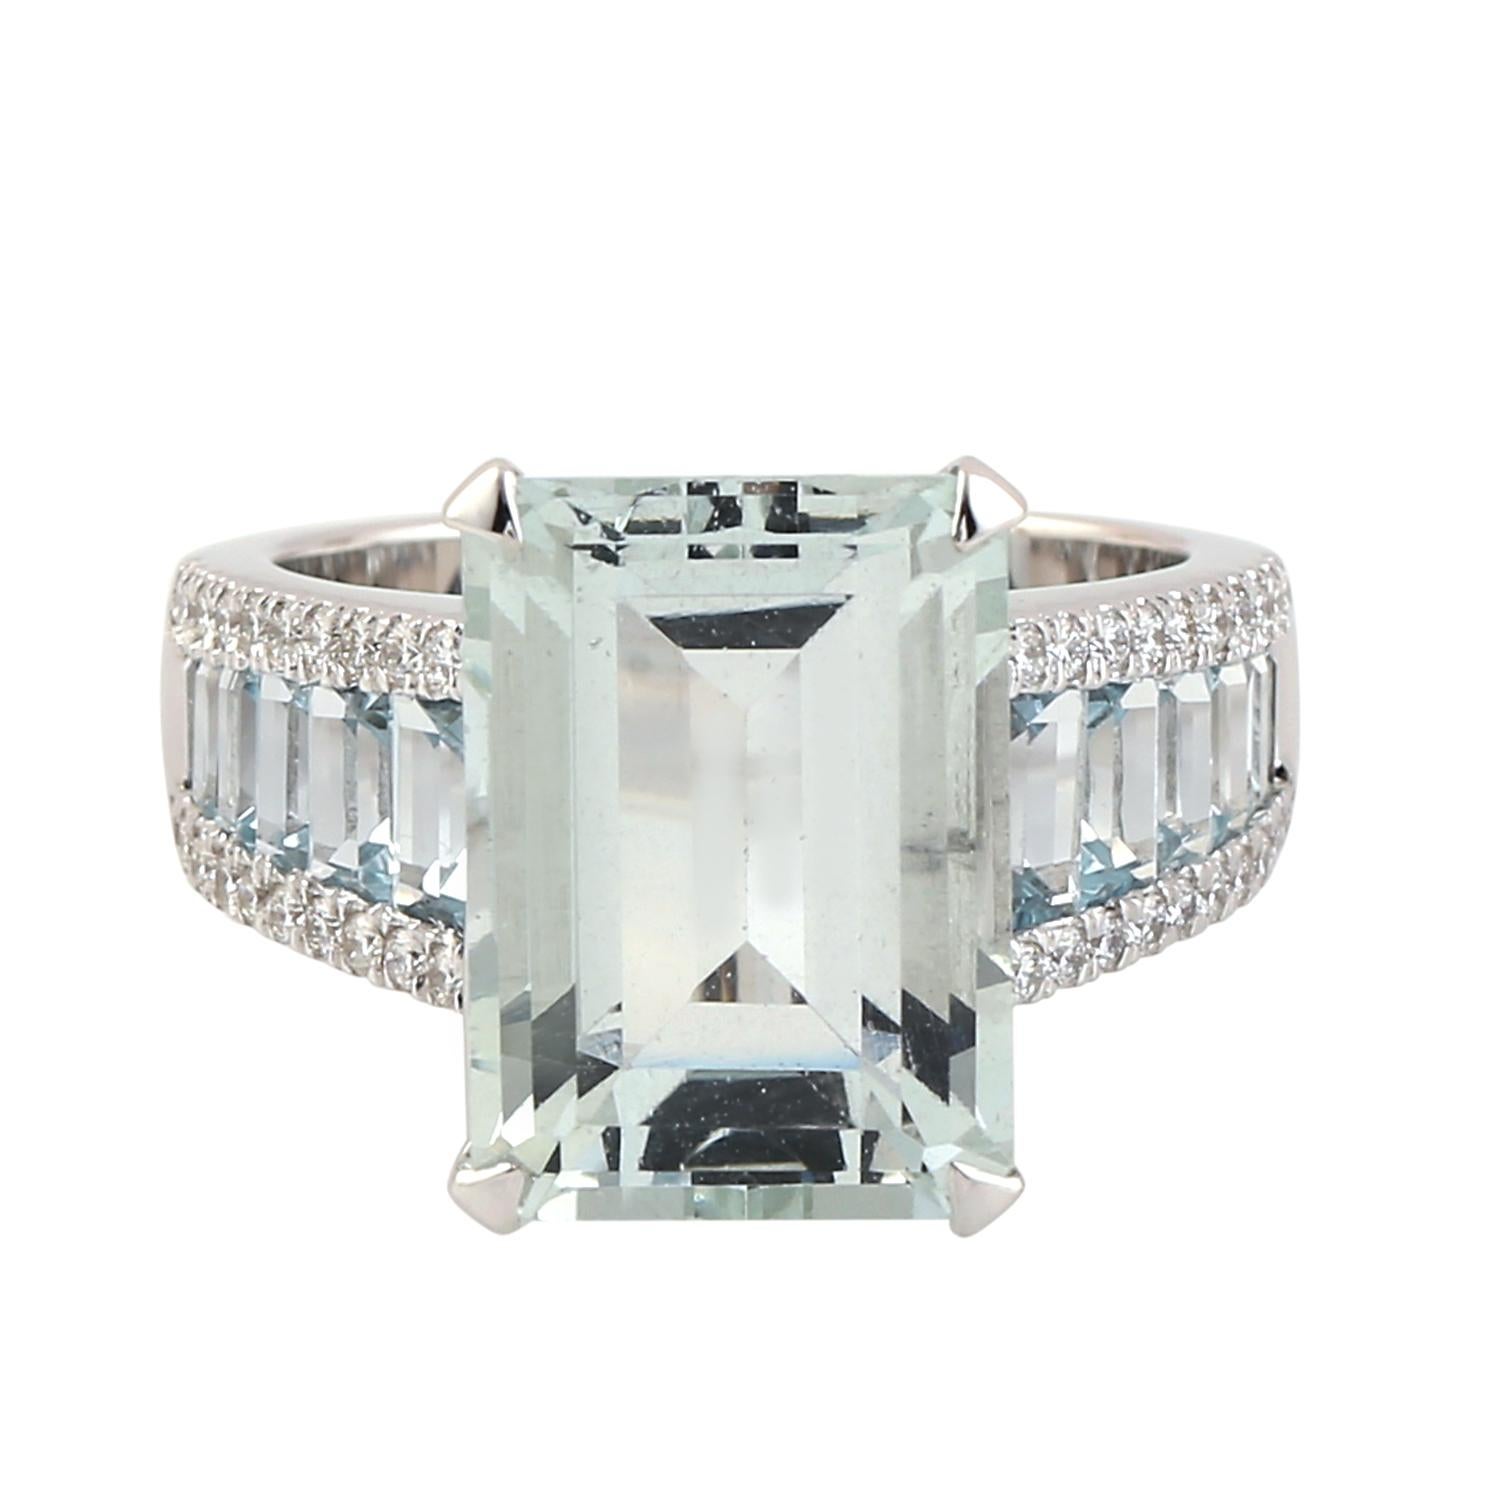 Women's Emerald Cut Aquamarine Baguette Ring With Diamonds Made in 18k White Gold For Sale